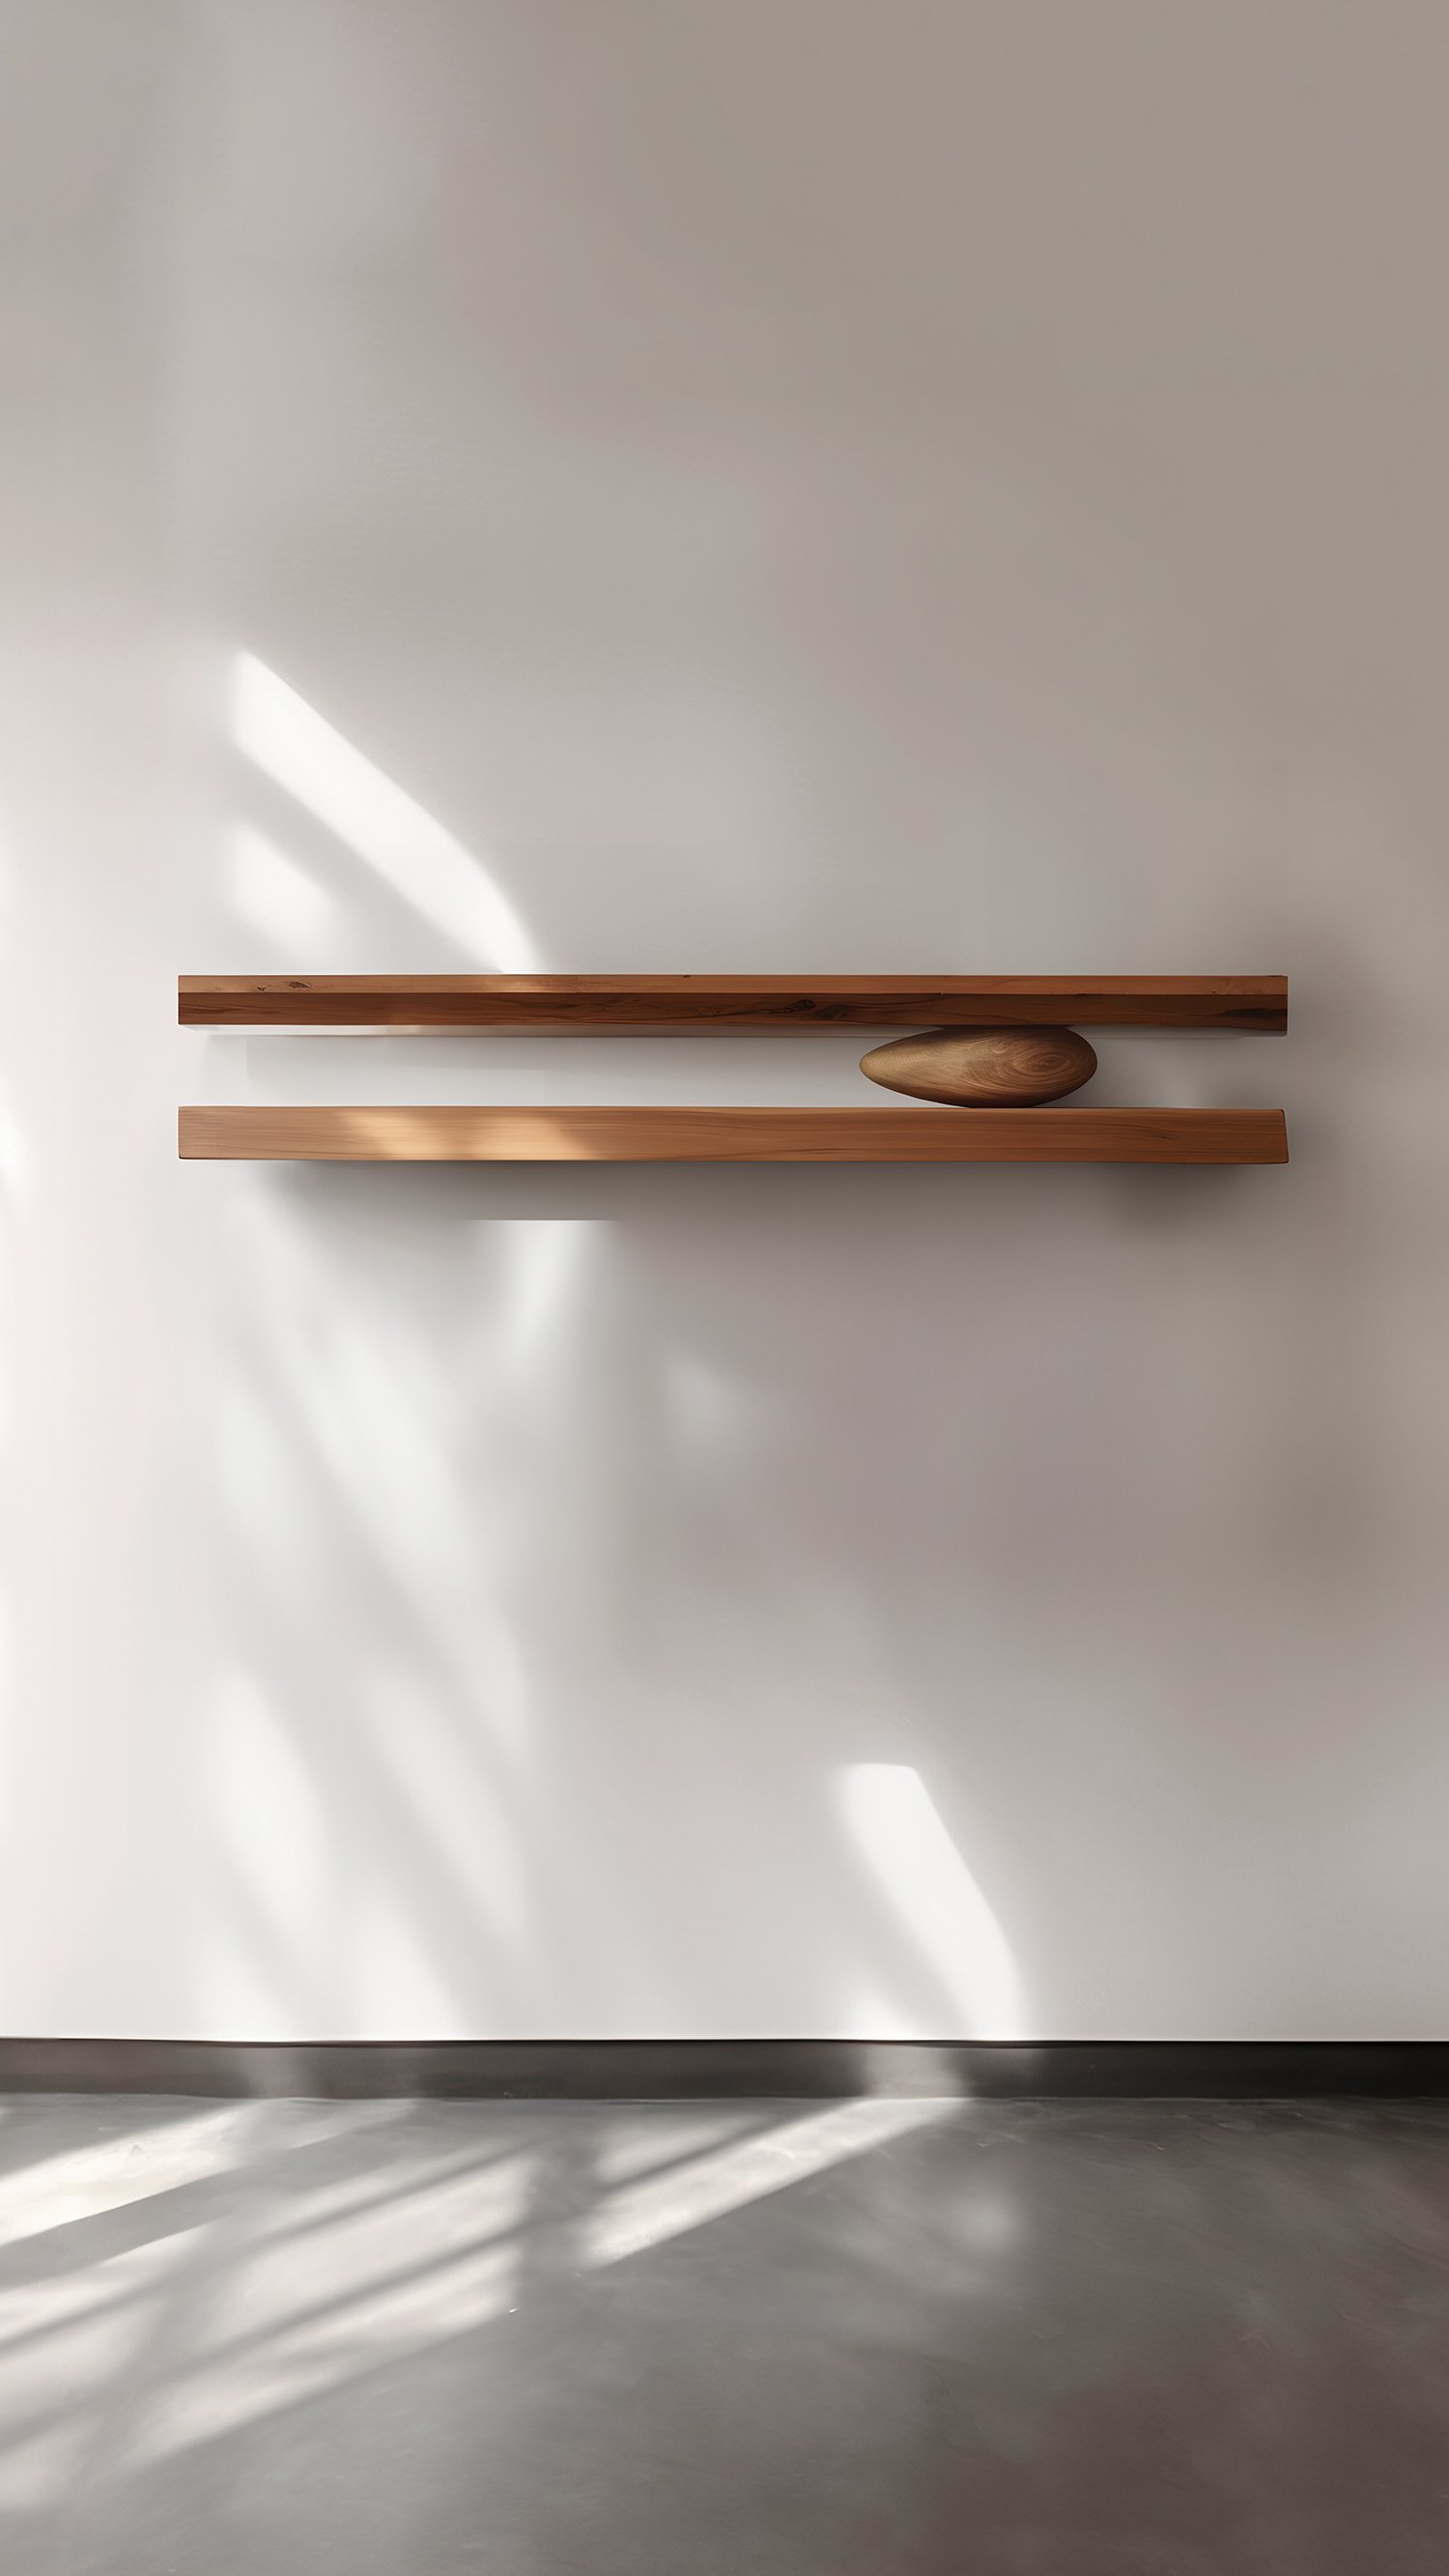 Set of Two Floating Shelves with One Sculptural Wooden Pebble Accent in the Middle, Sereno by Joel Escalona — 9.jpg